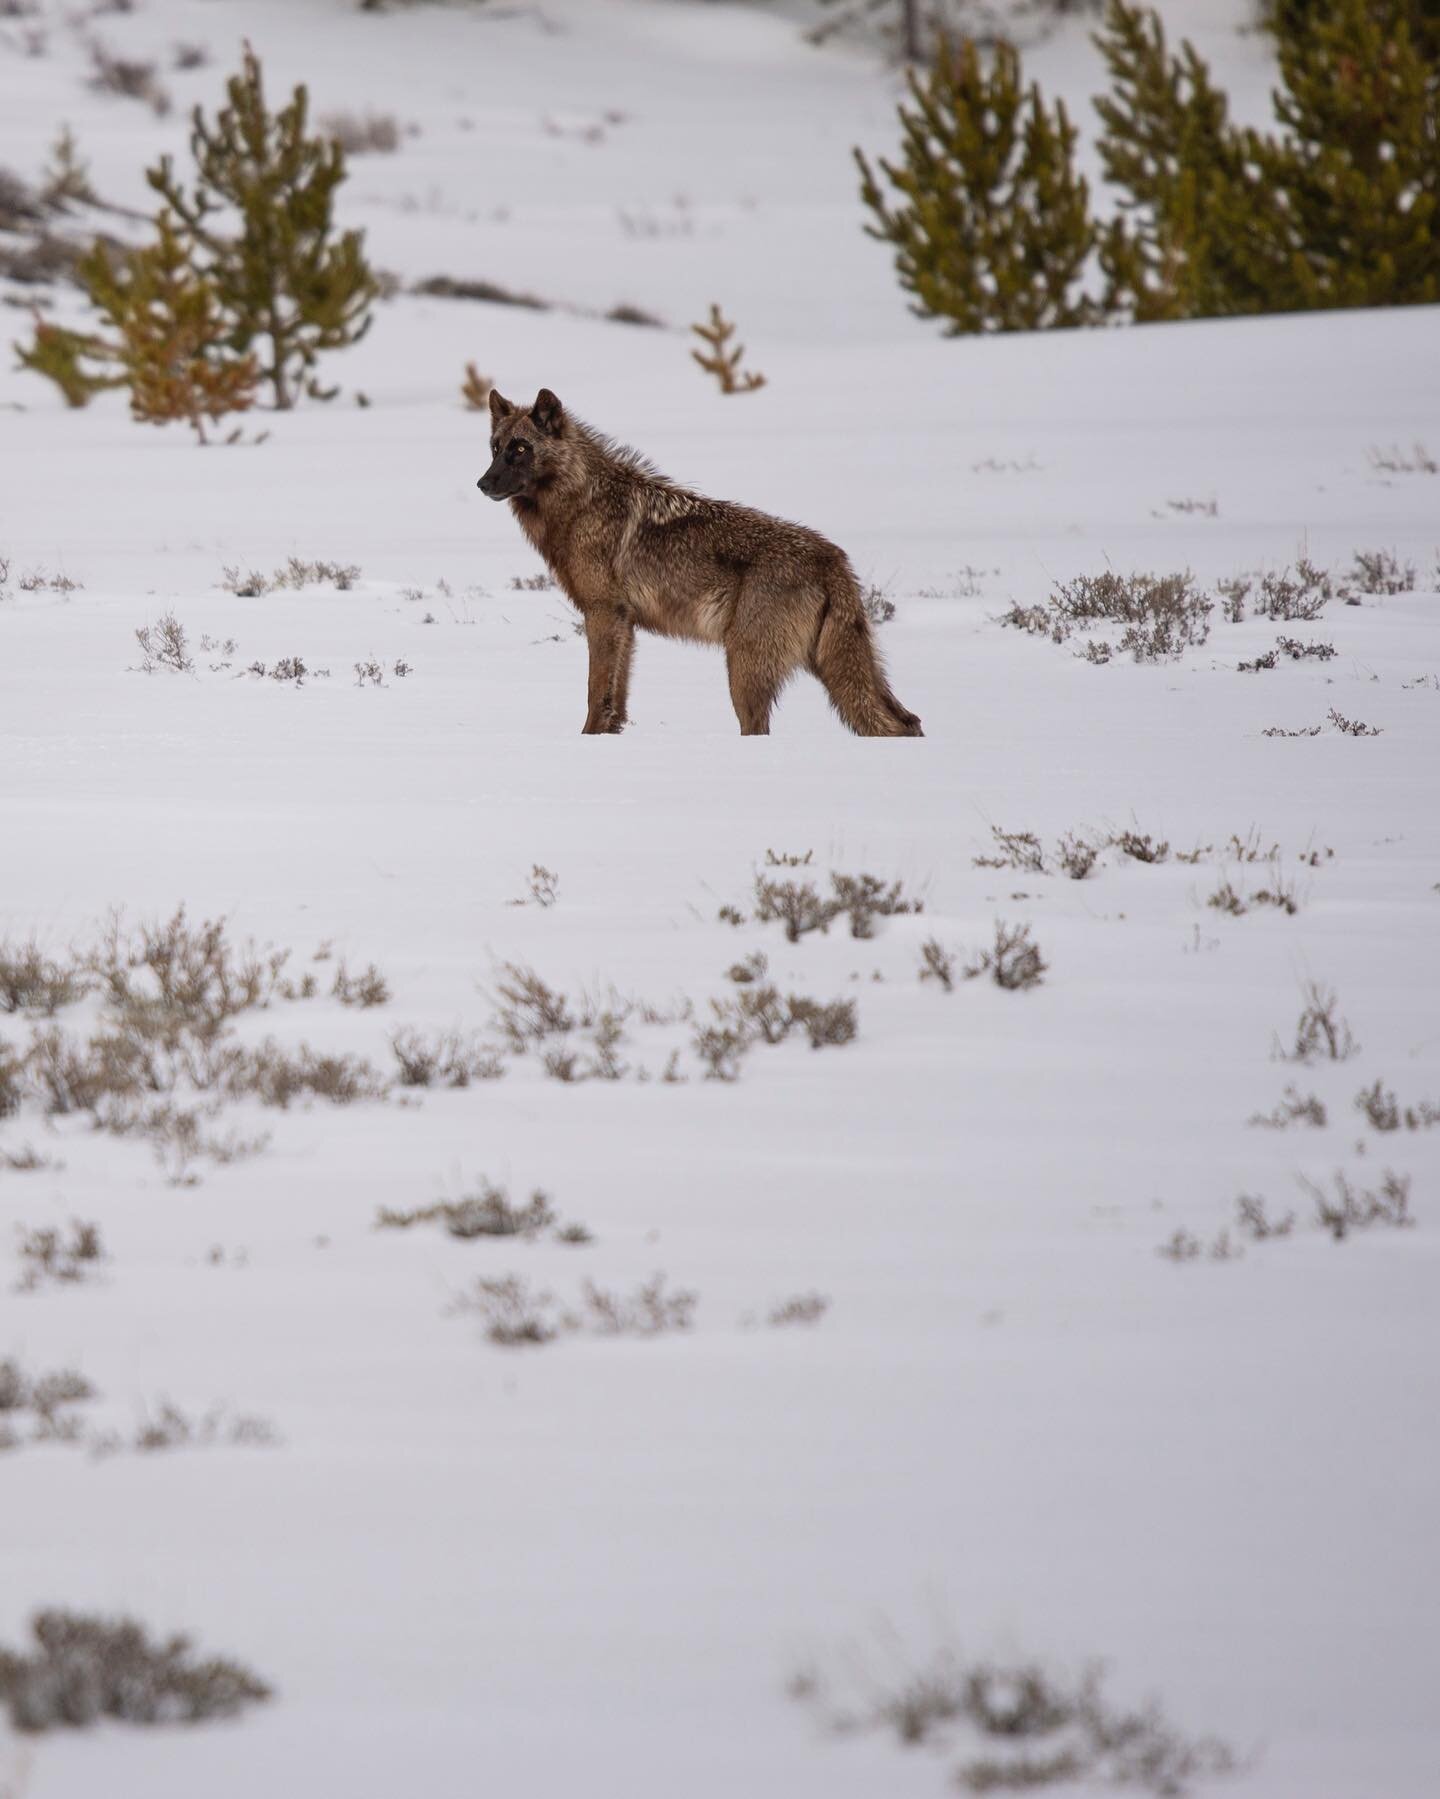 Was able to get down to Yellowstone over the weekend and got to see wolves! It was my first time ever seeing any so I&rsquo;m stoked to have spotted them and gotten pictures, it was fun listening to them howling to one another
.
.
.
#wolf #wolves #wo